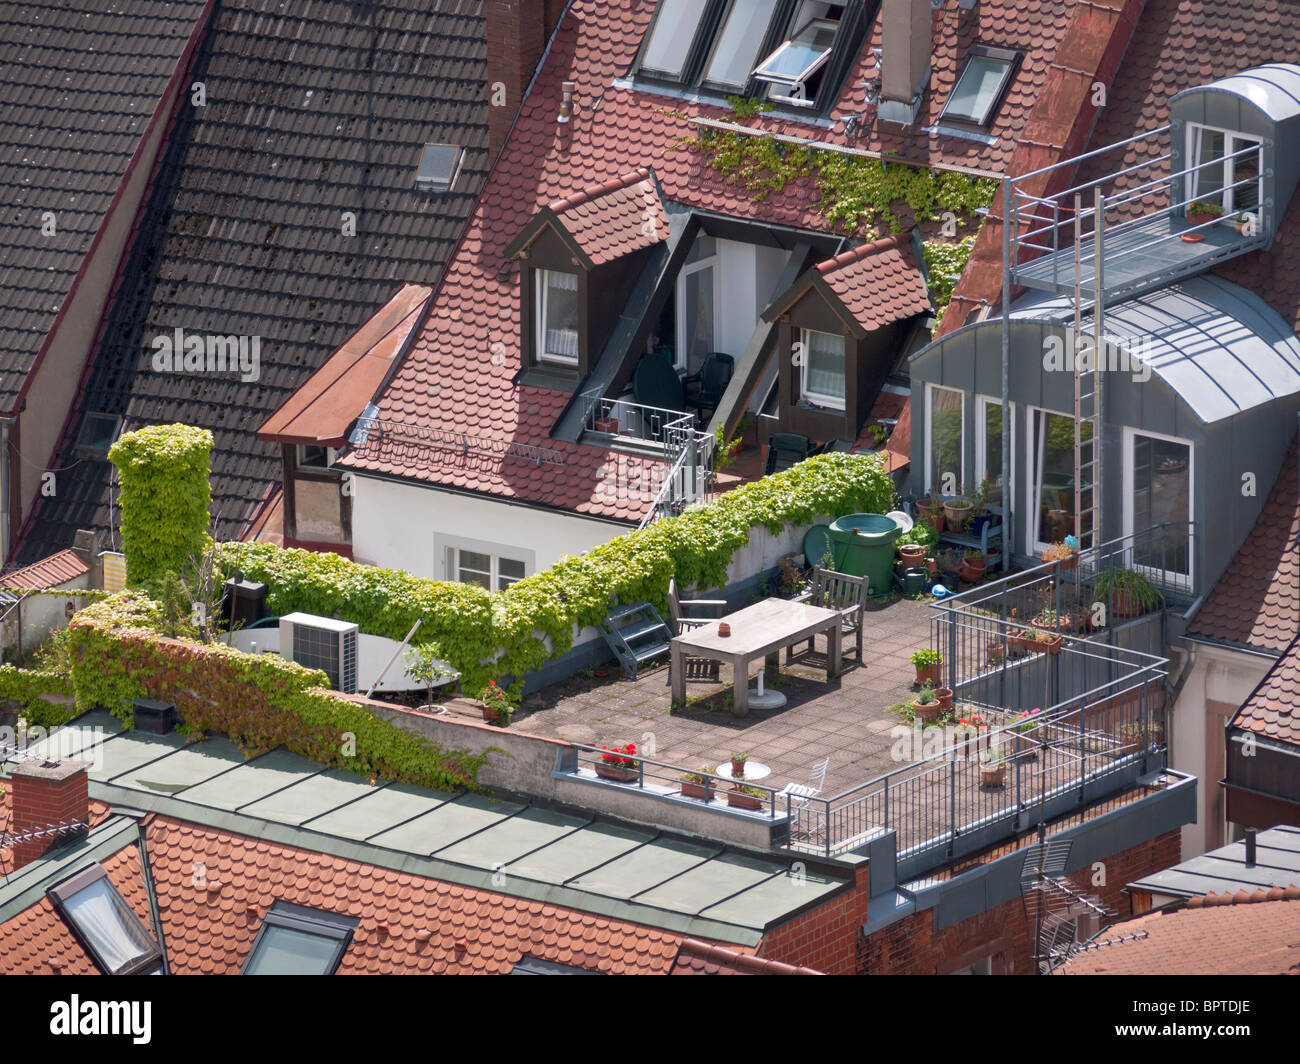 A roof terrace / rooftop garden in the old town of Freiburg im Breisgau in Southern Germany. Stock Photo